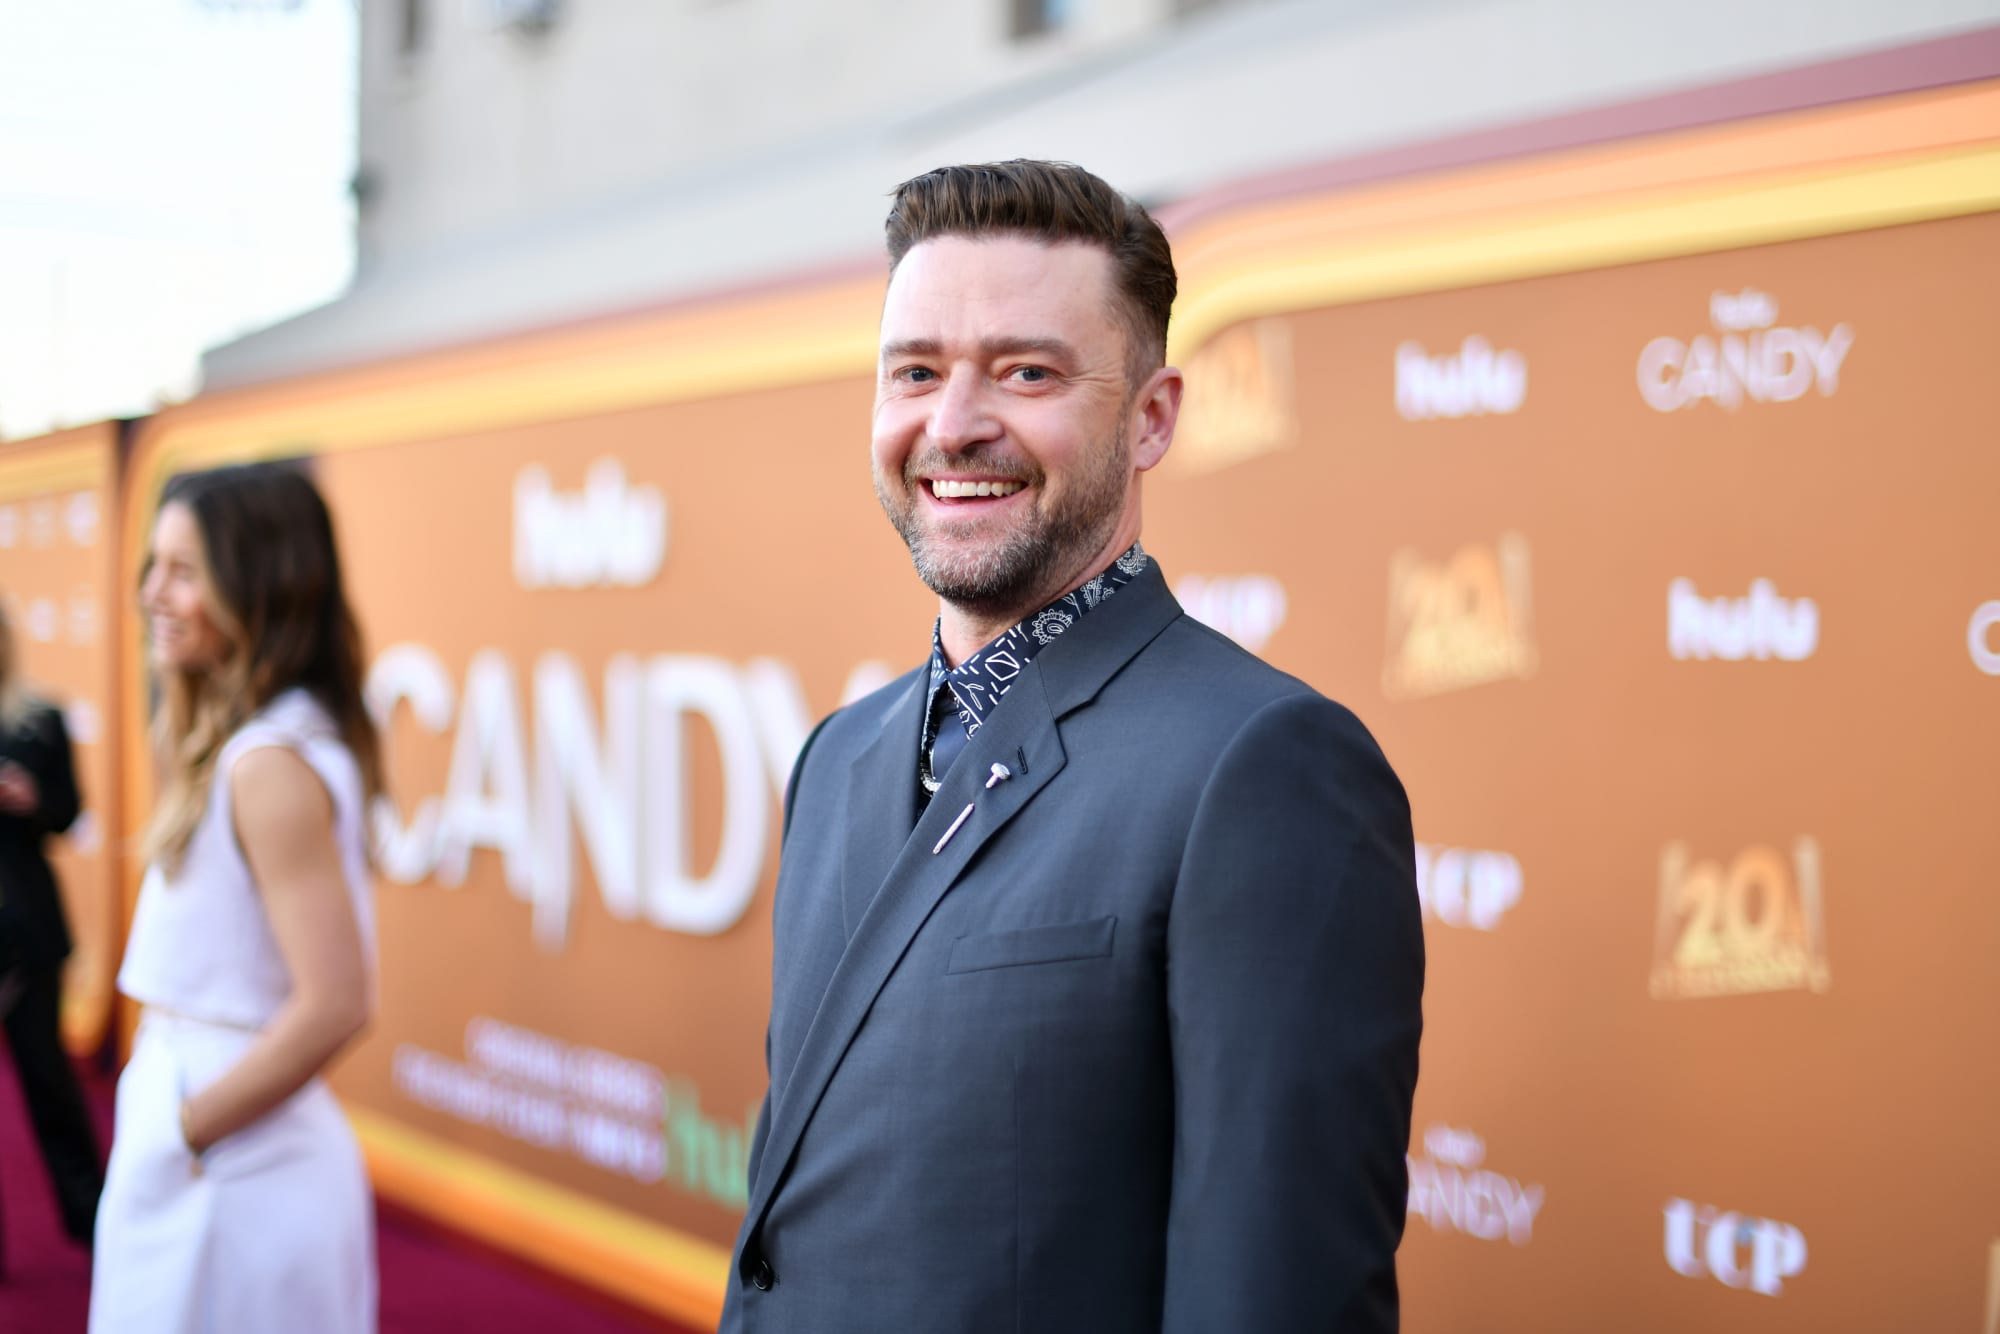 Reptile starring Justin Timberlake release updates, cast, and more